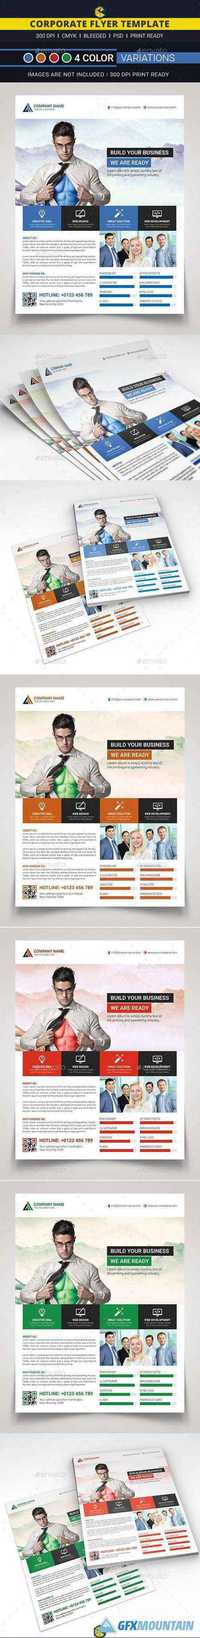 GraphicRiver - Corporate Business Flyer 12851579